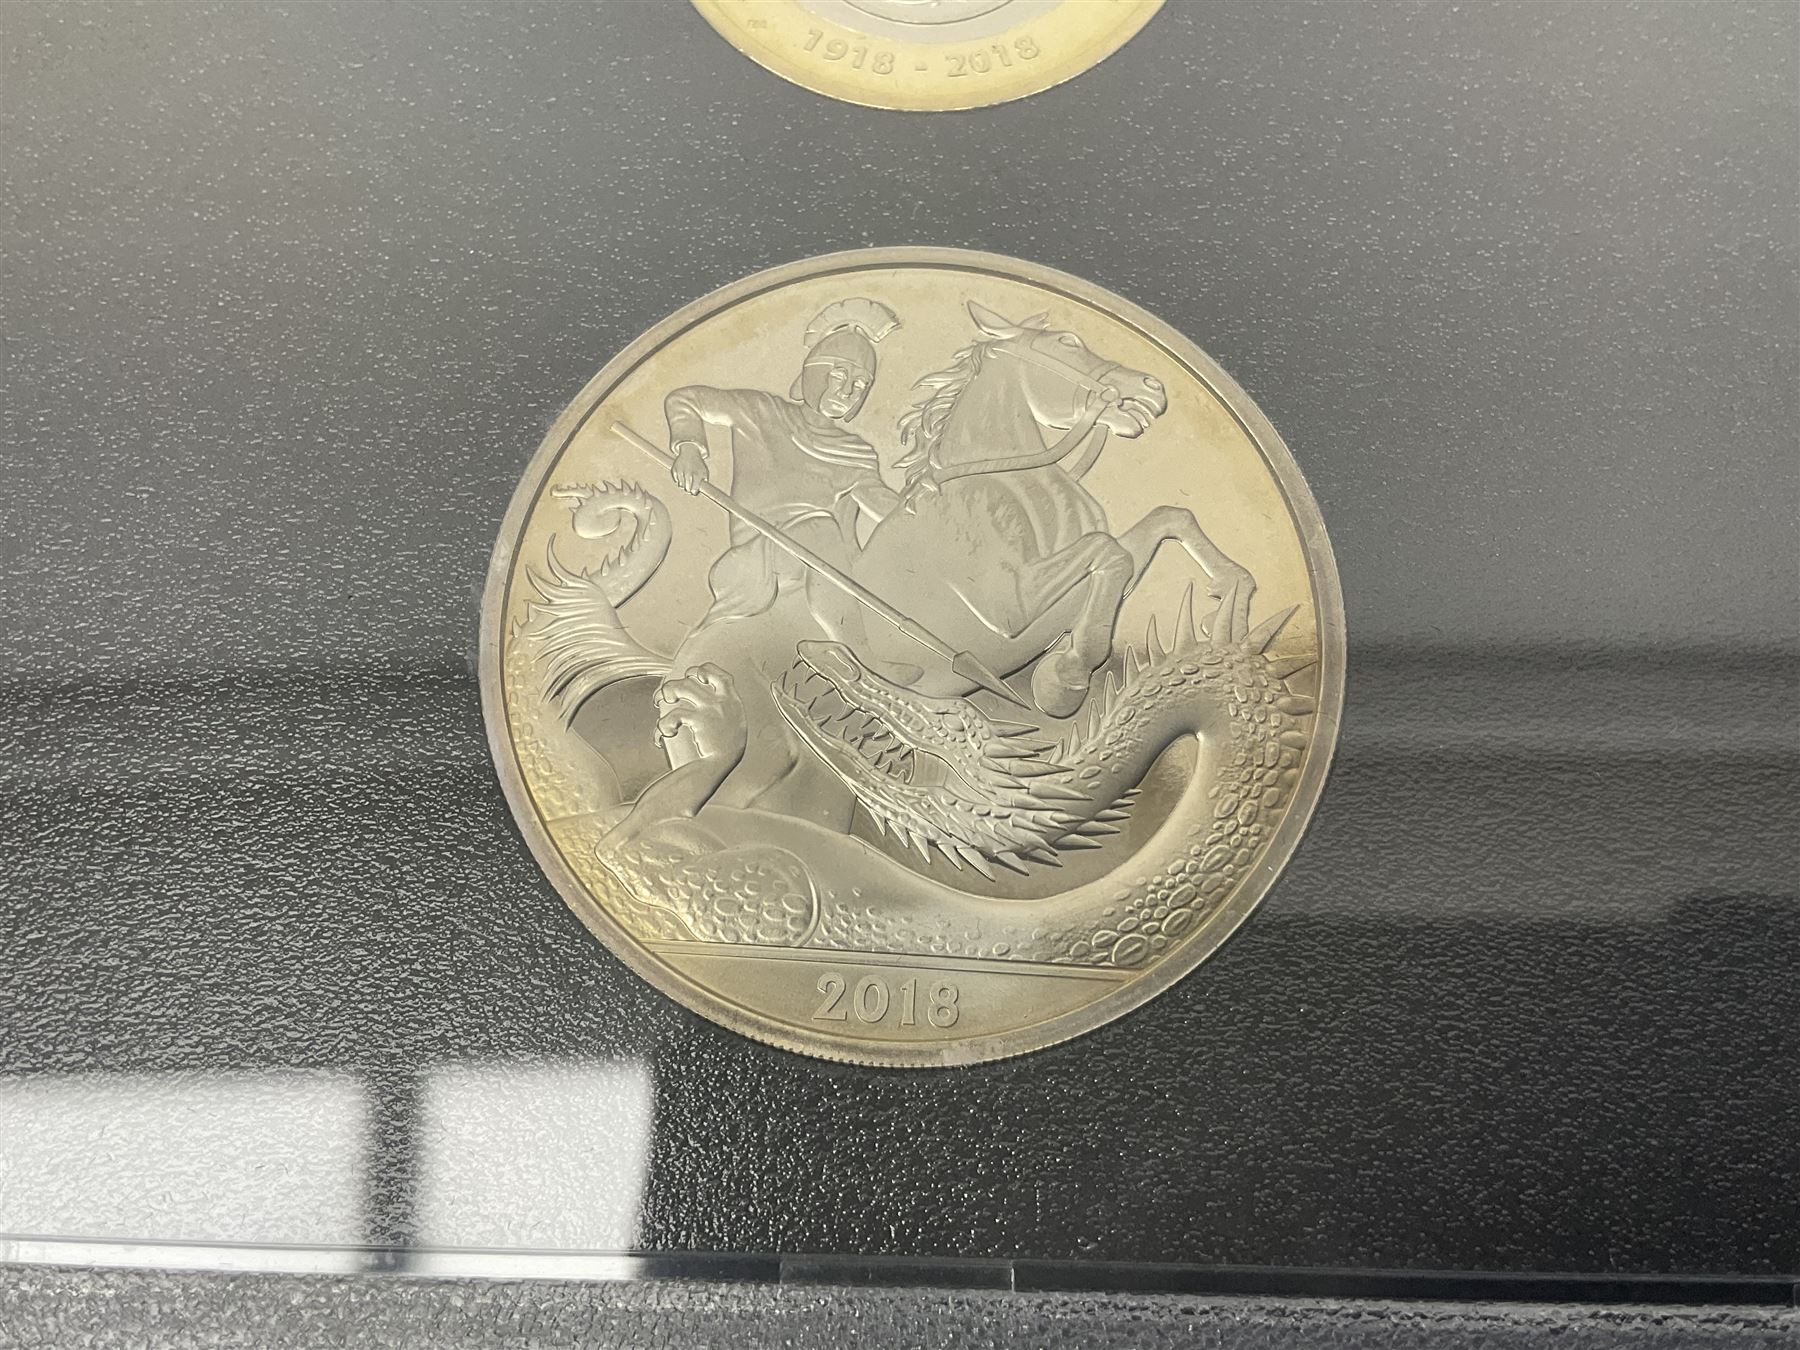 The Royal Mint United Kingdom 2018 proof coin set - Image 6 of 8